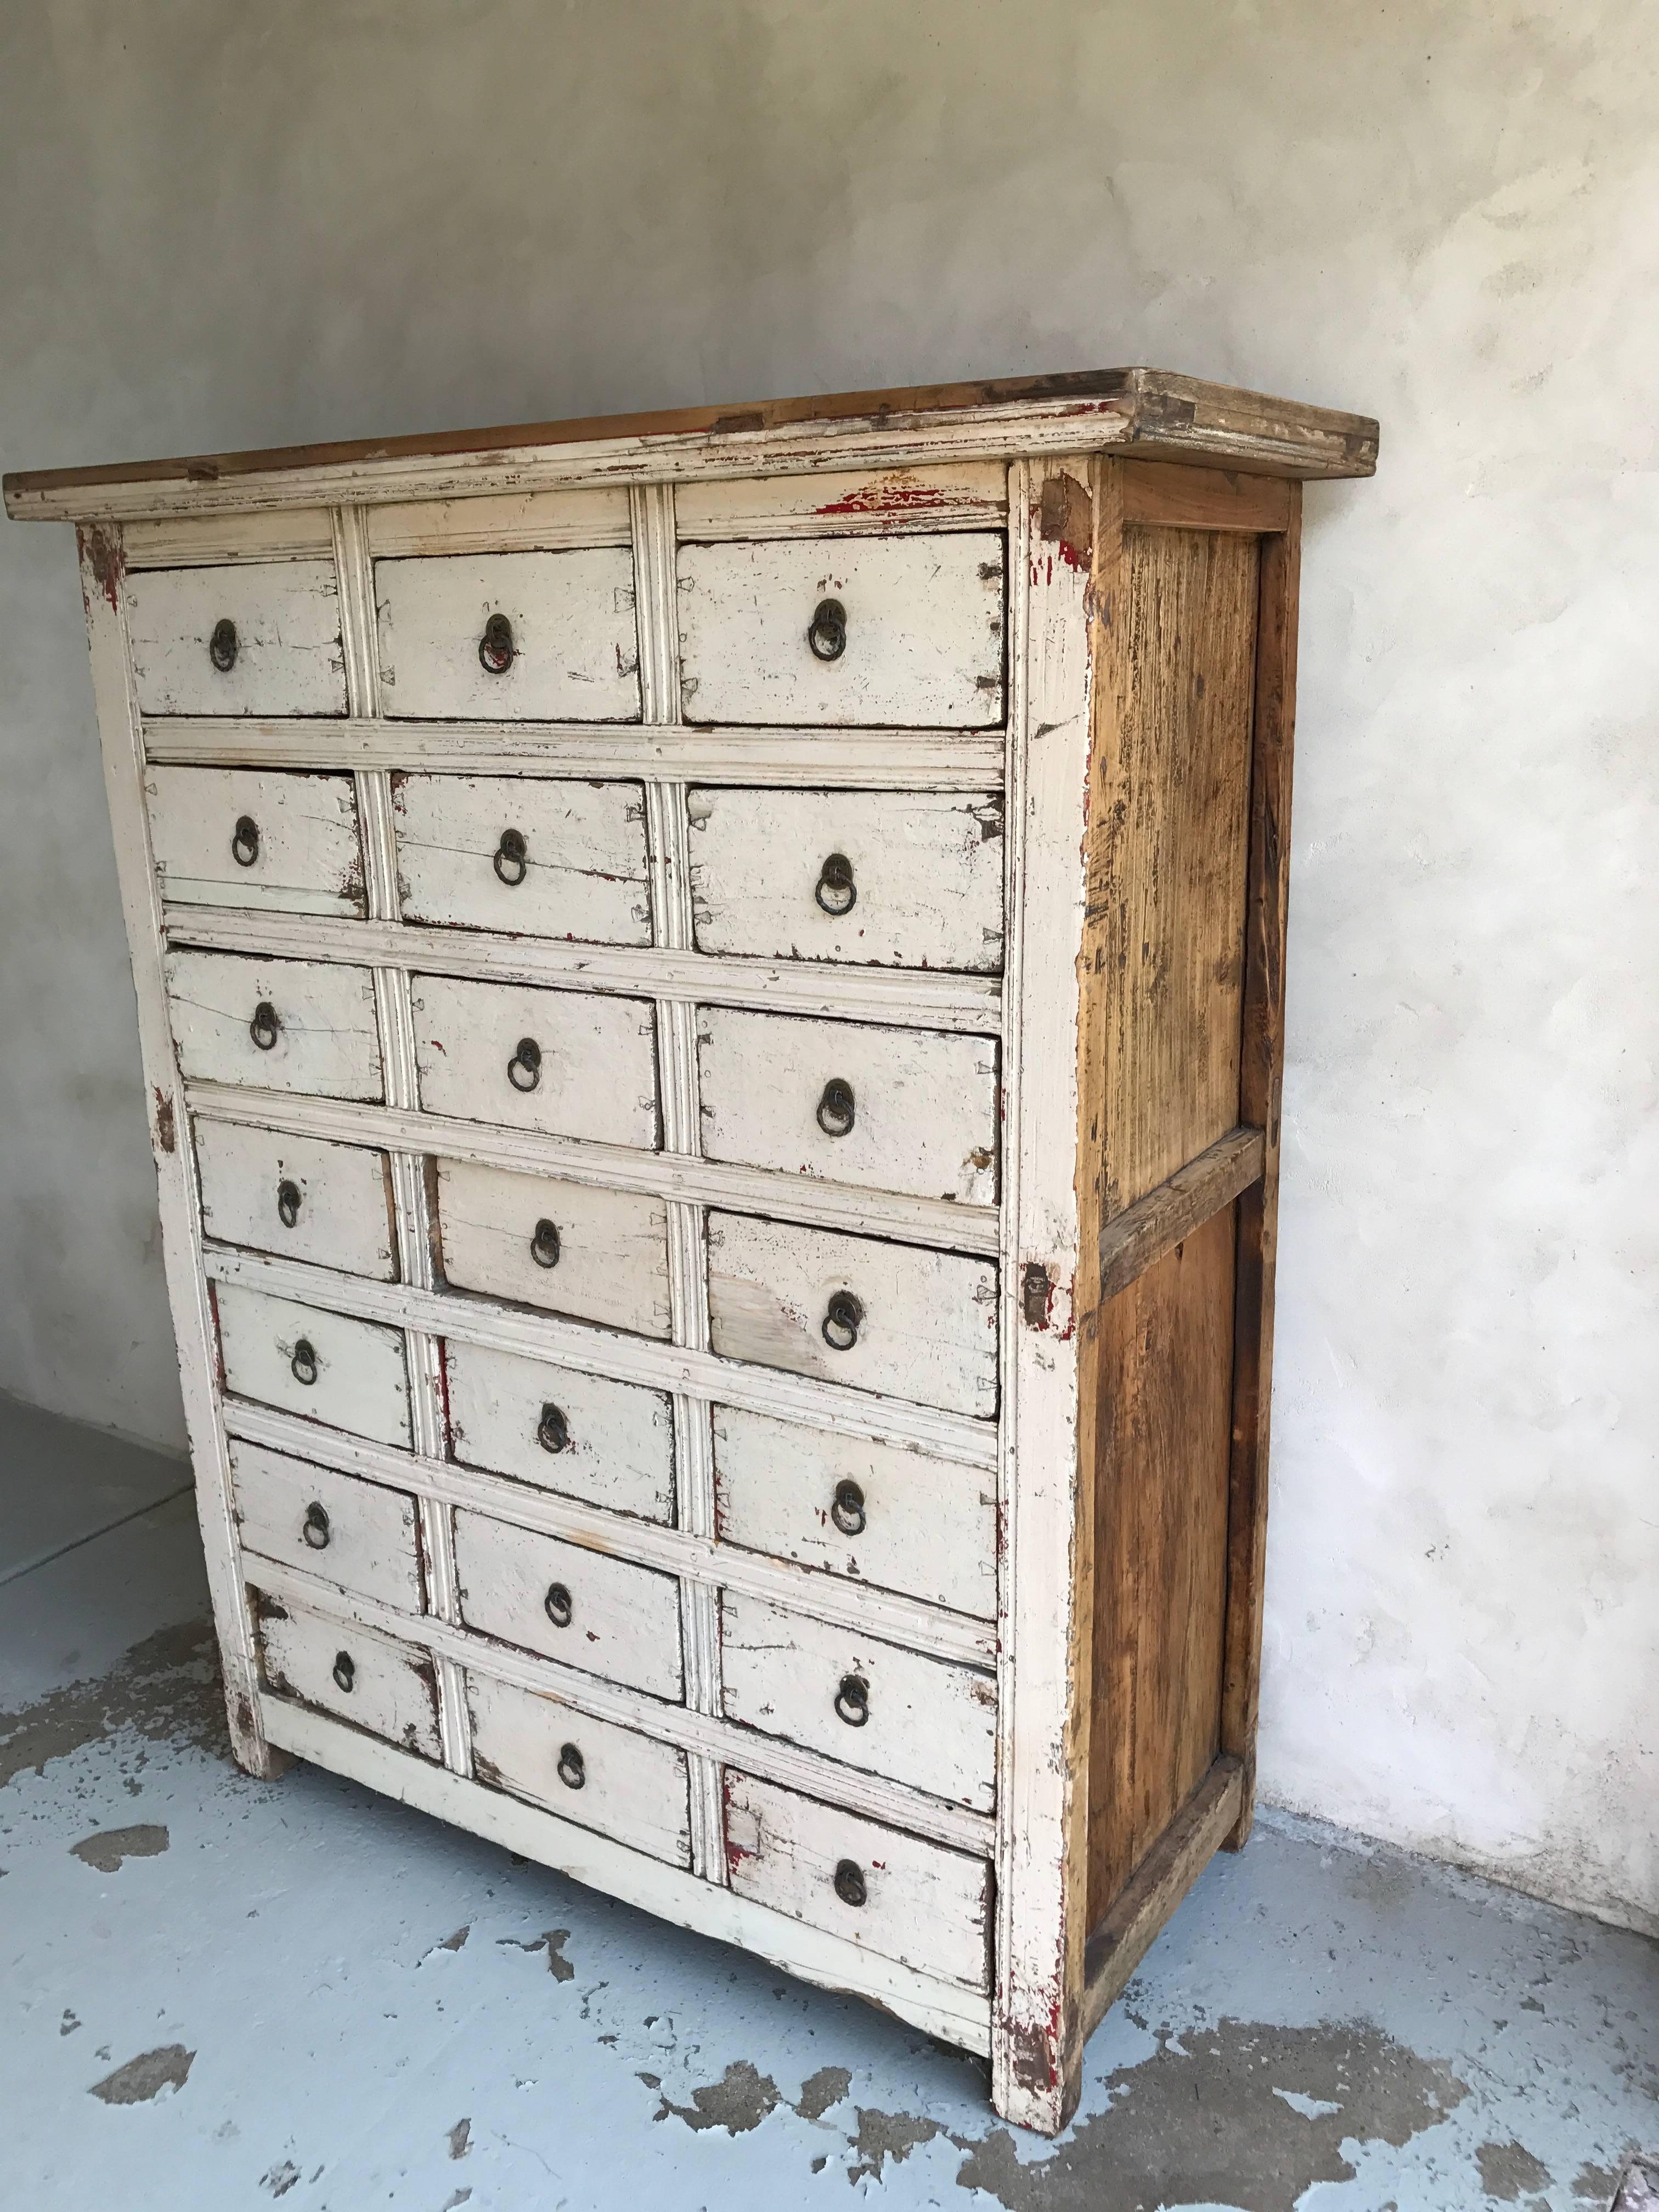 A Primitive distress painted cabinet with 21 drawers. Solid and heavy construction.